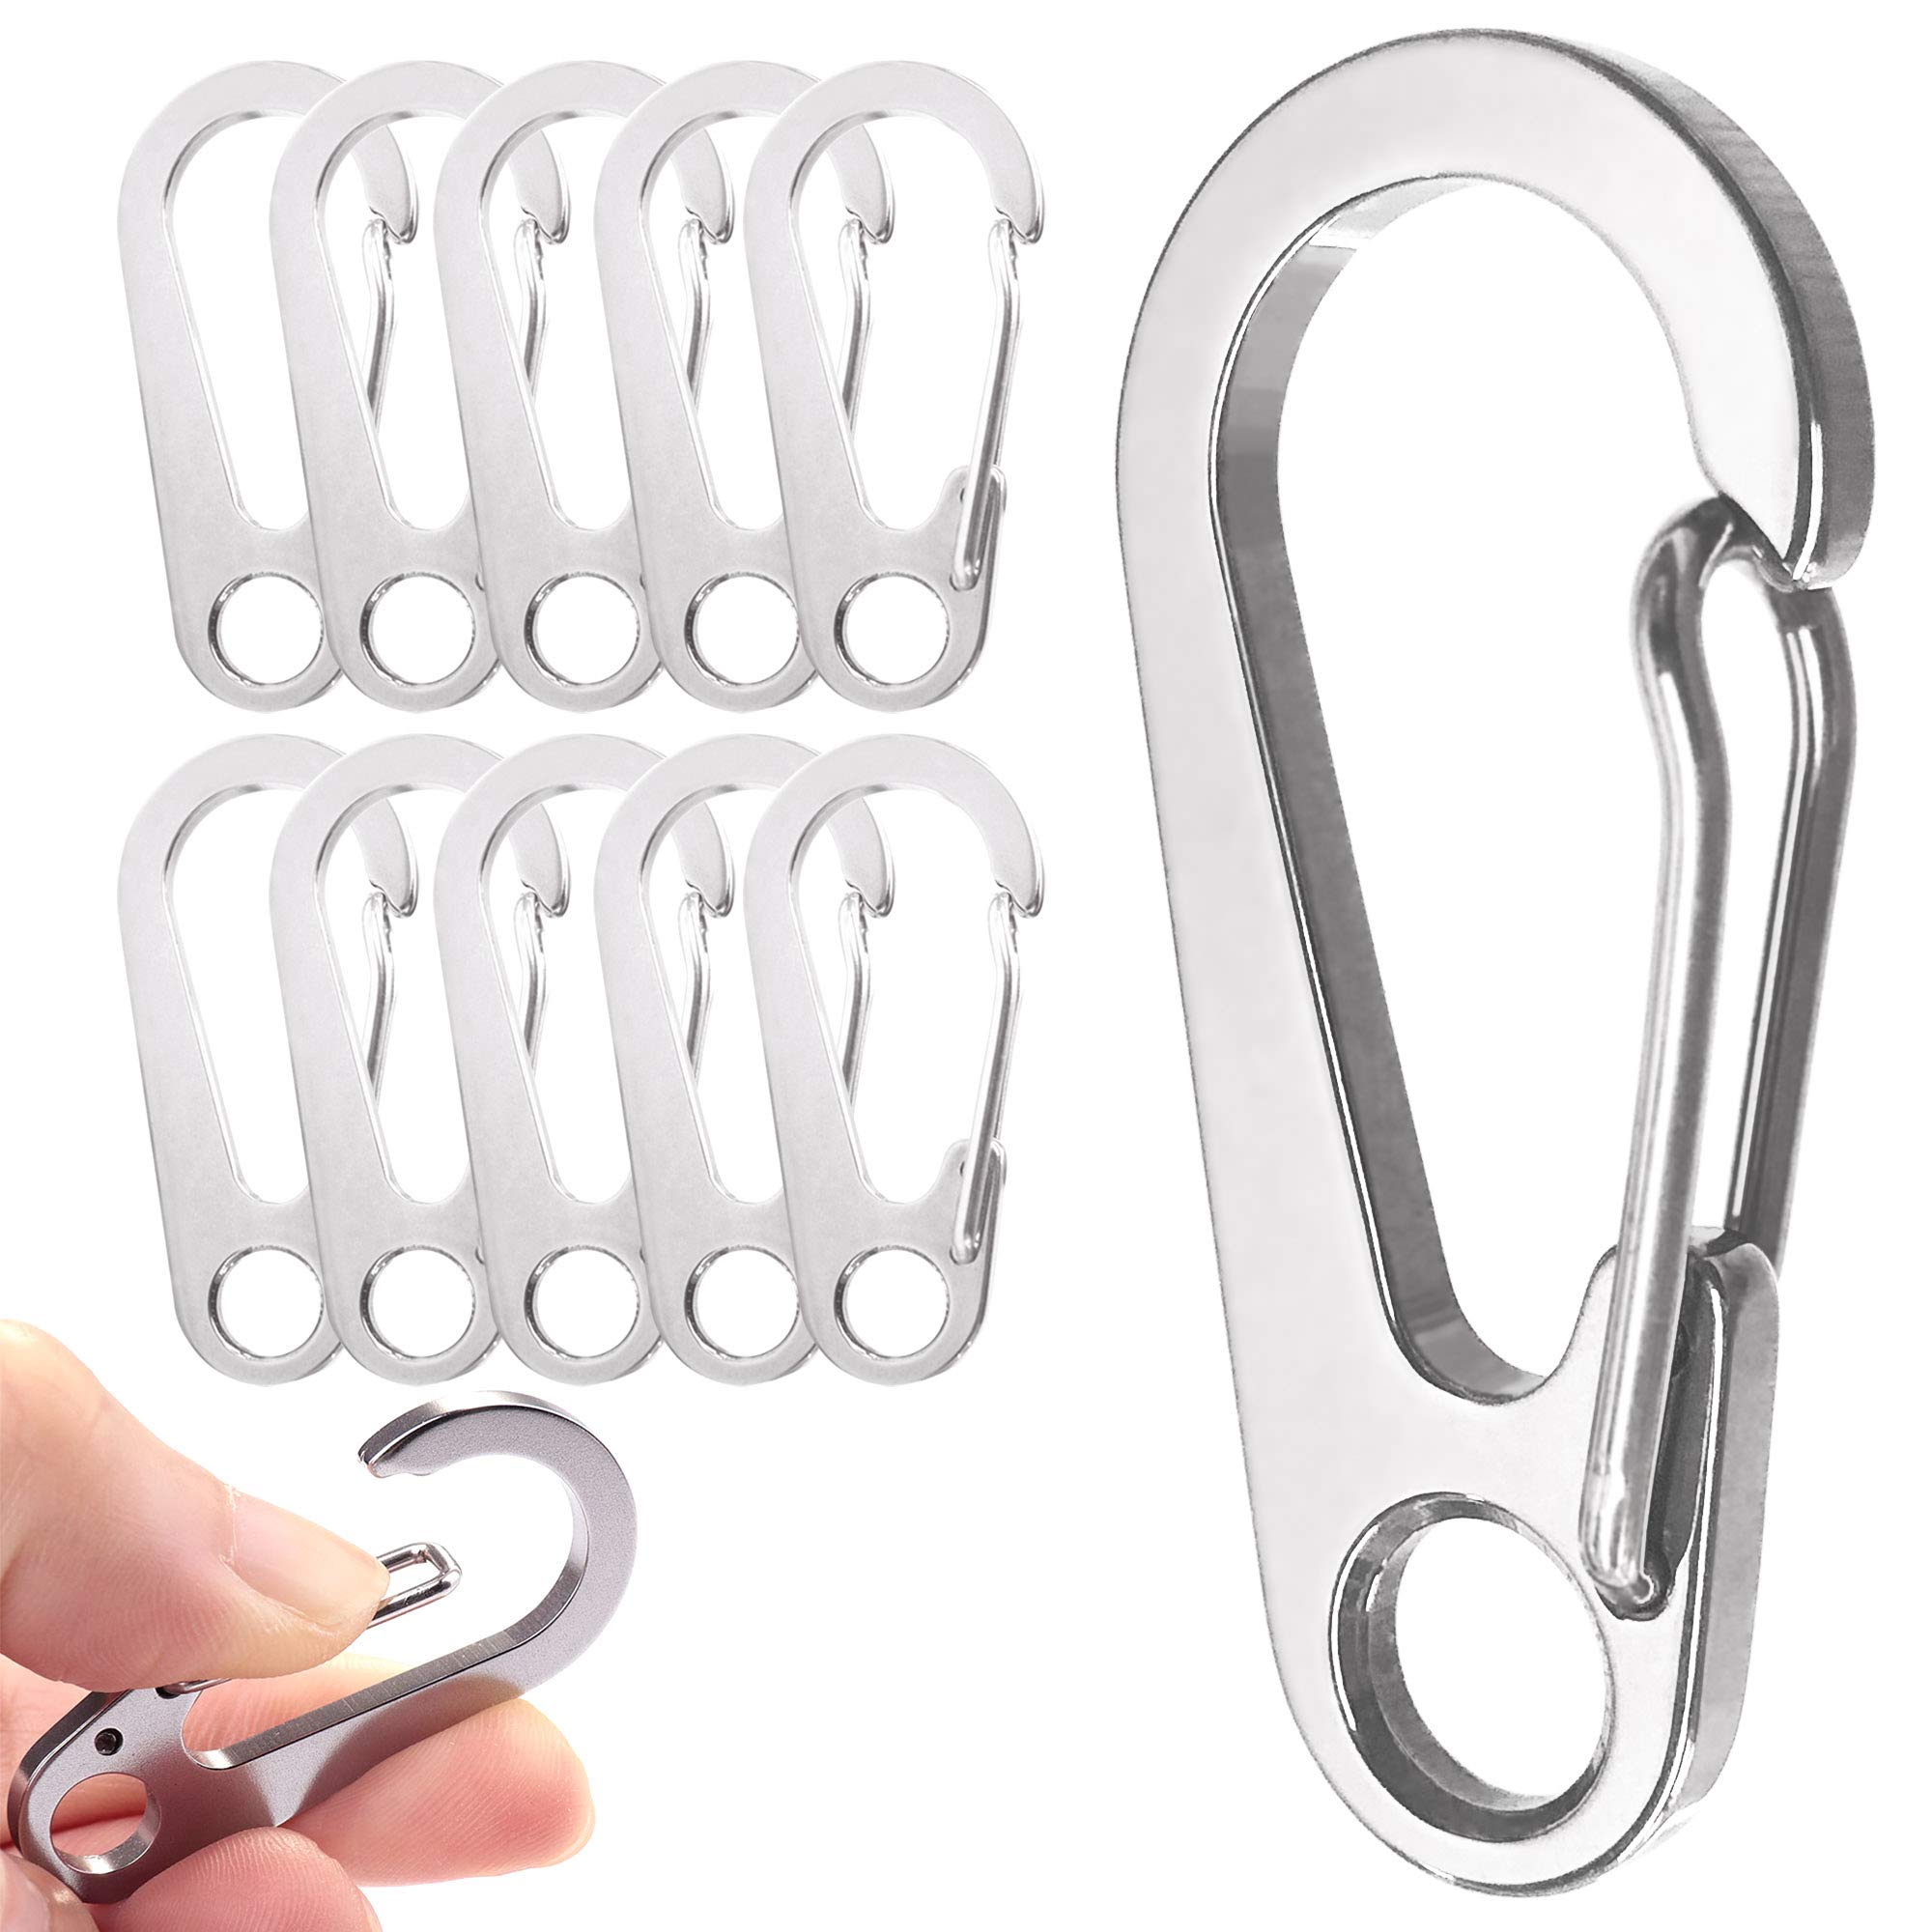 10PCS 1.77 Inch Stainless Steel Clip Spring-Snap Hook,EDC Mini